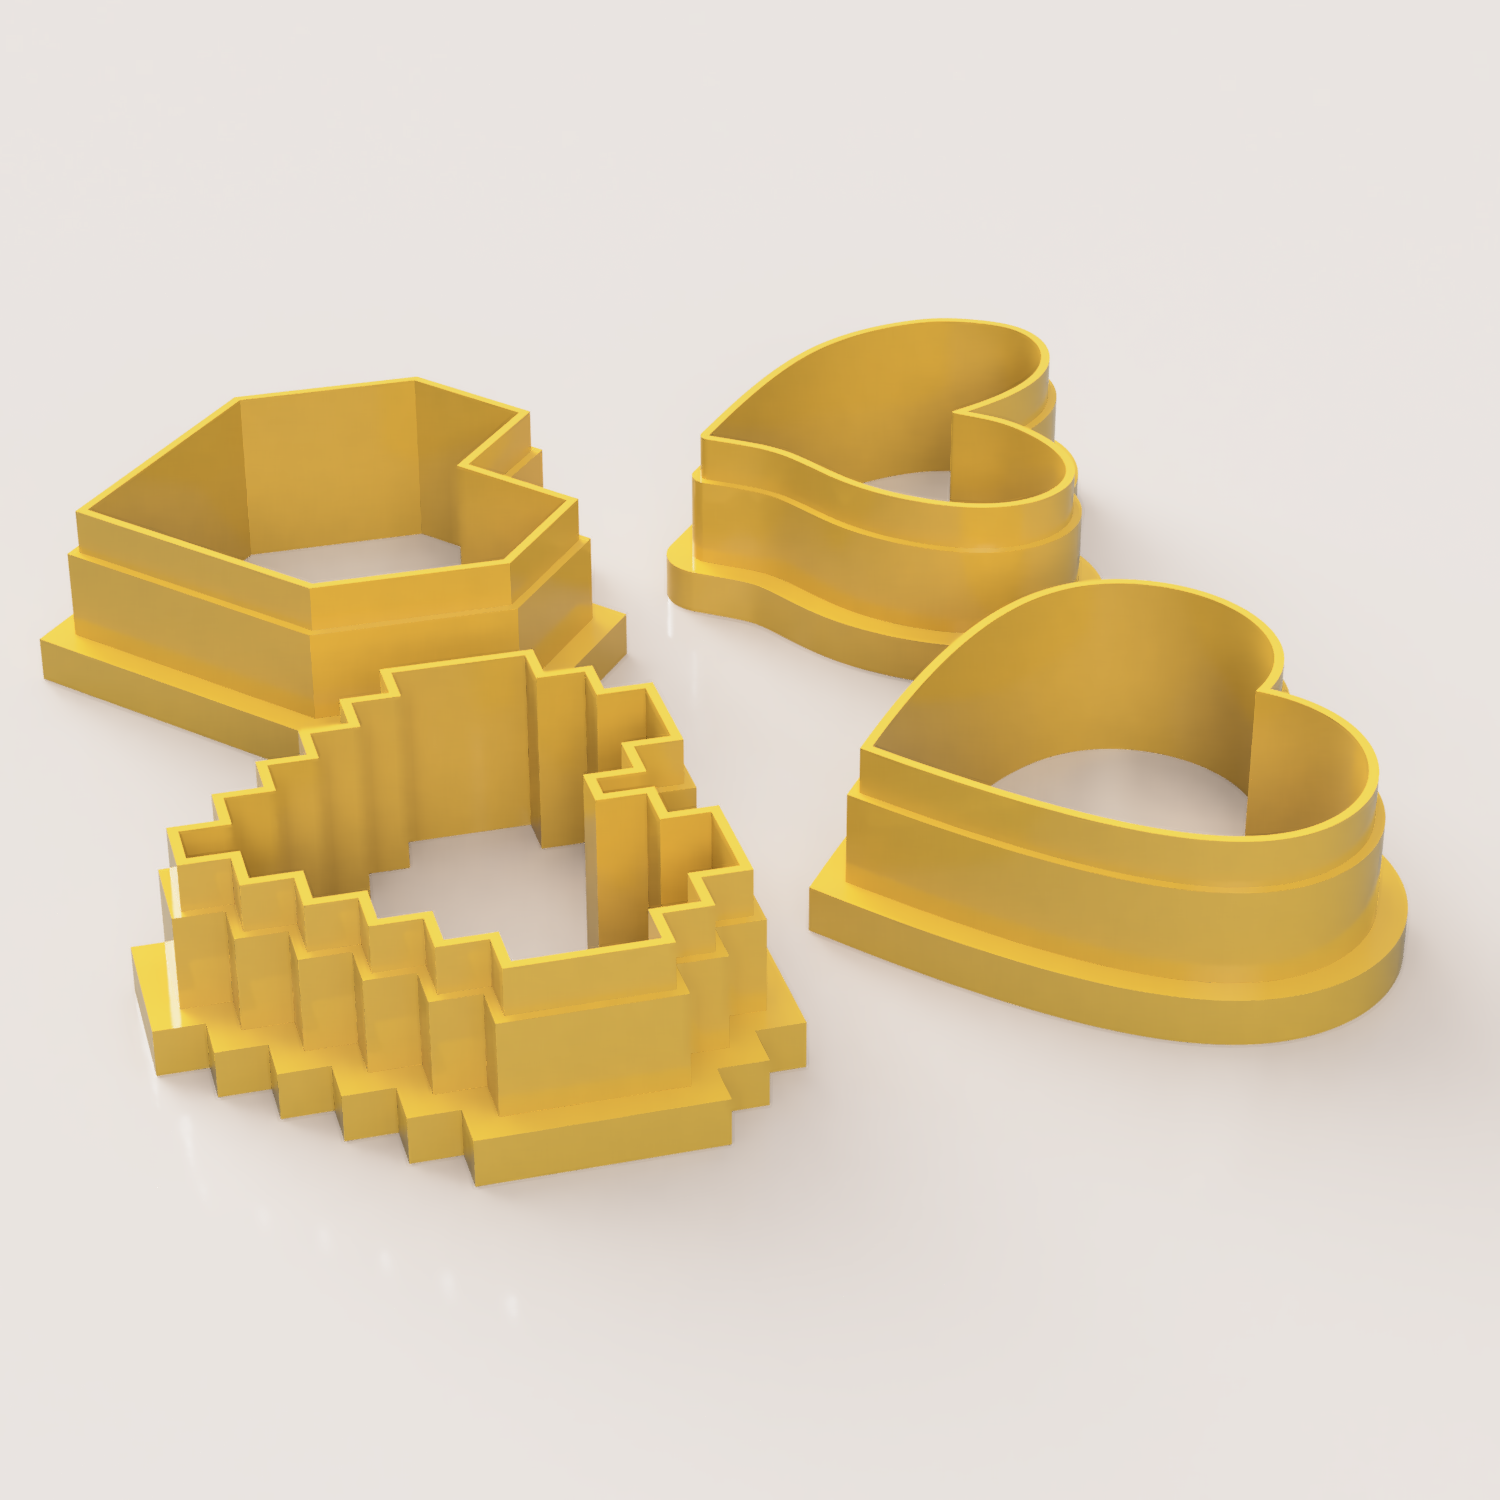 heart clay cutter 3D Models to Print - yeggi